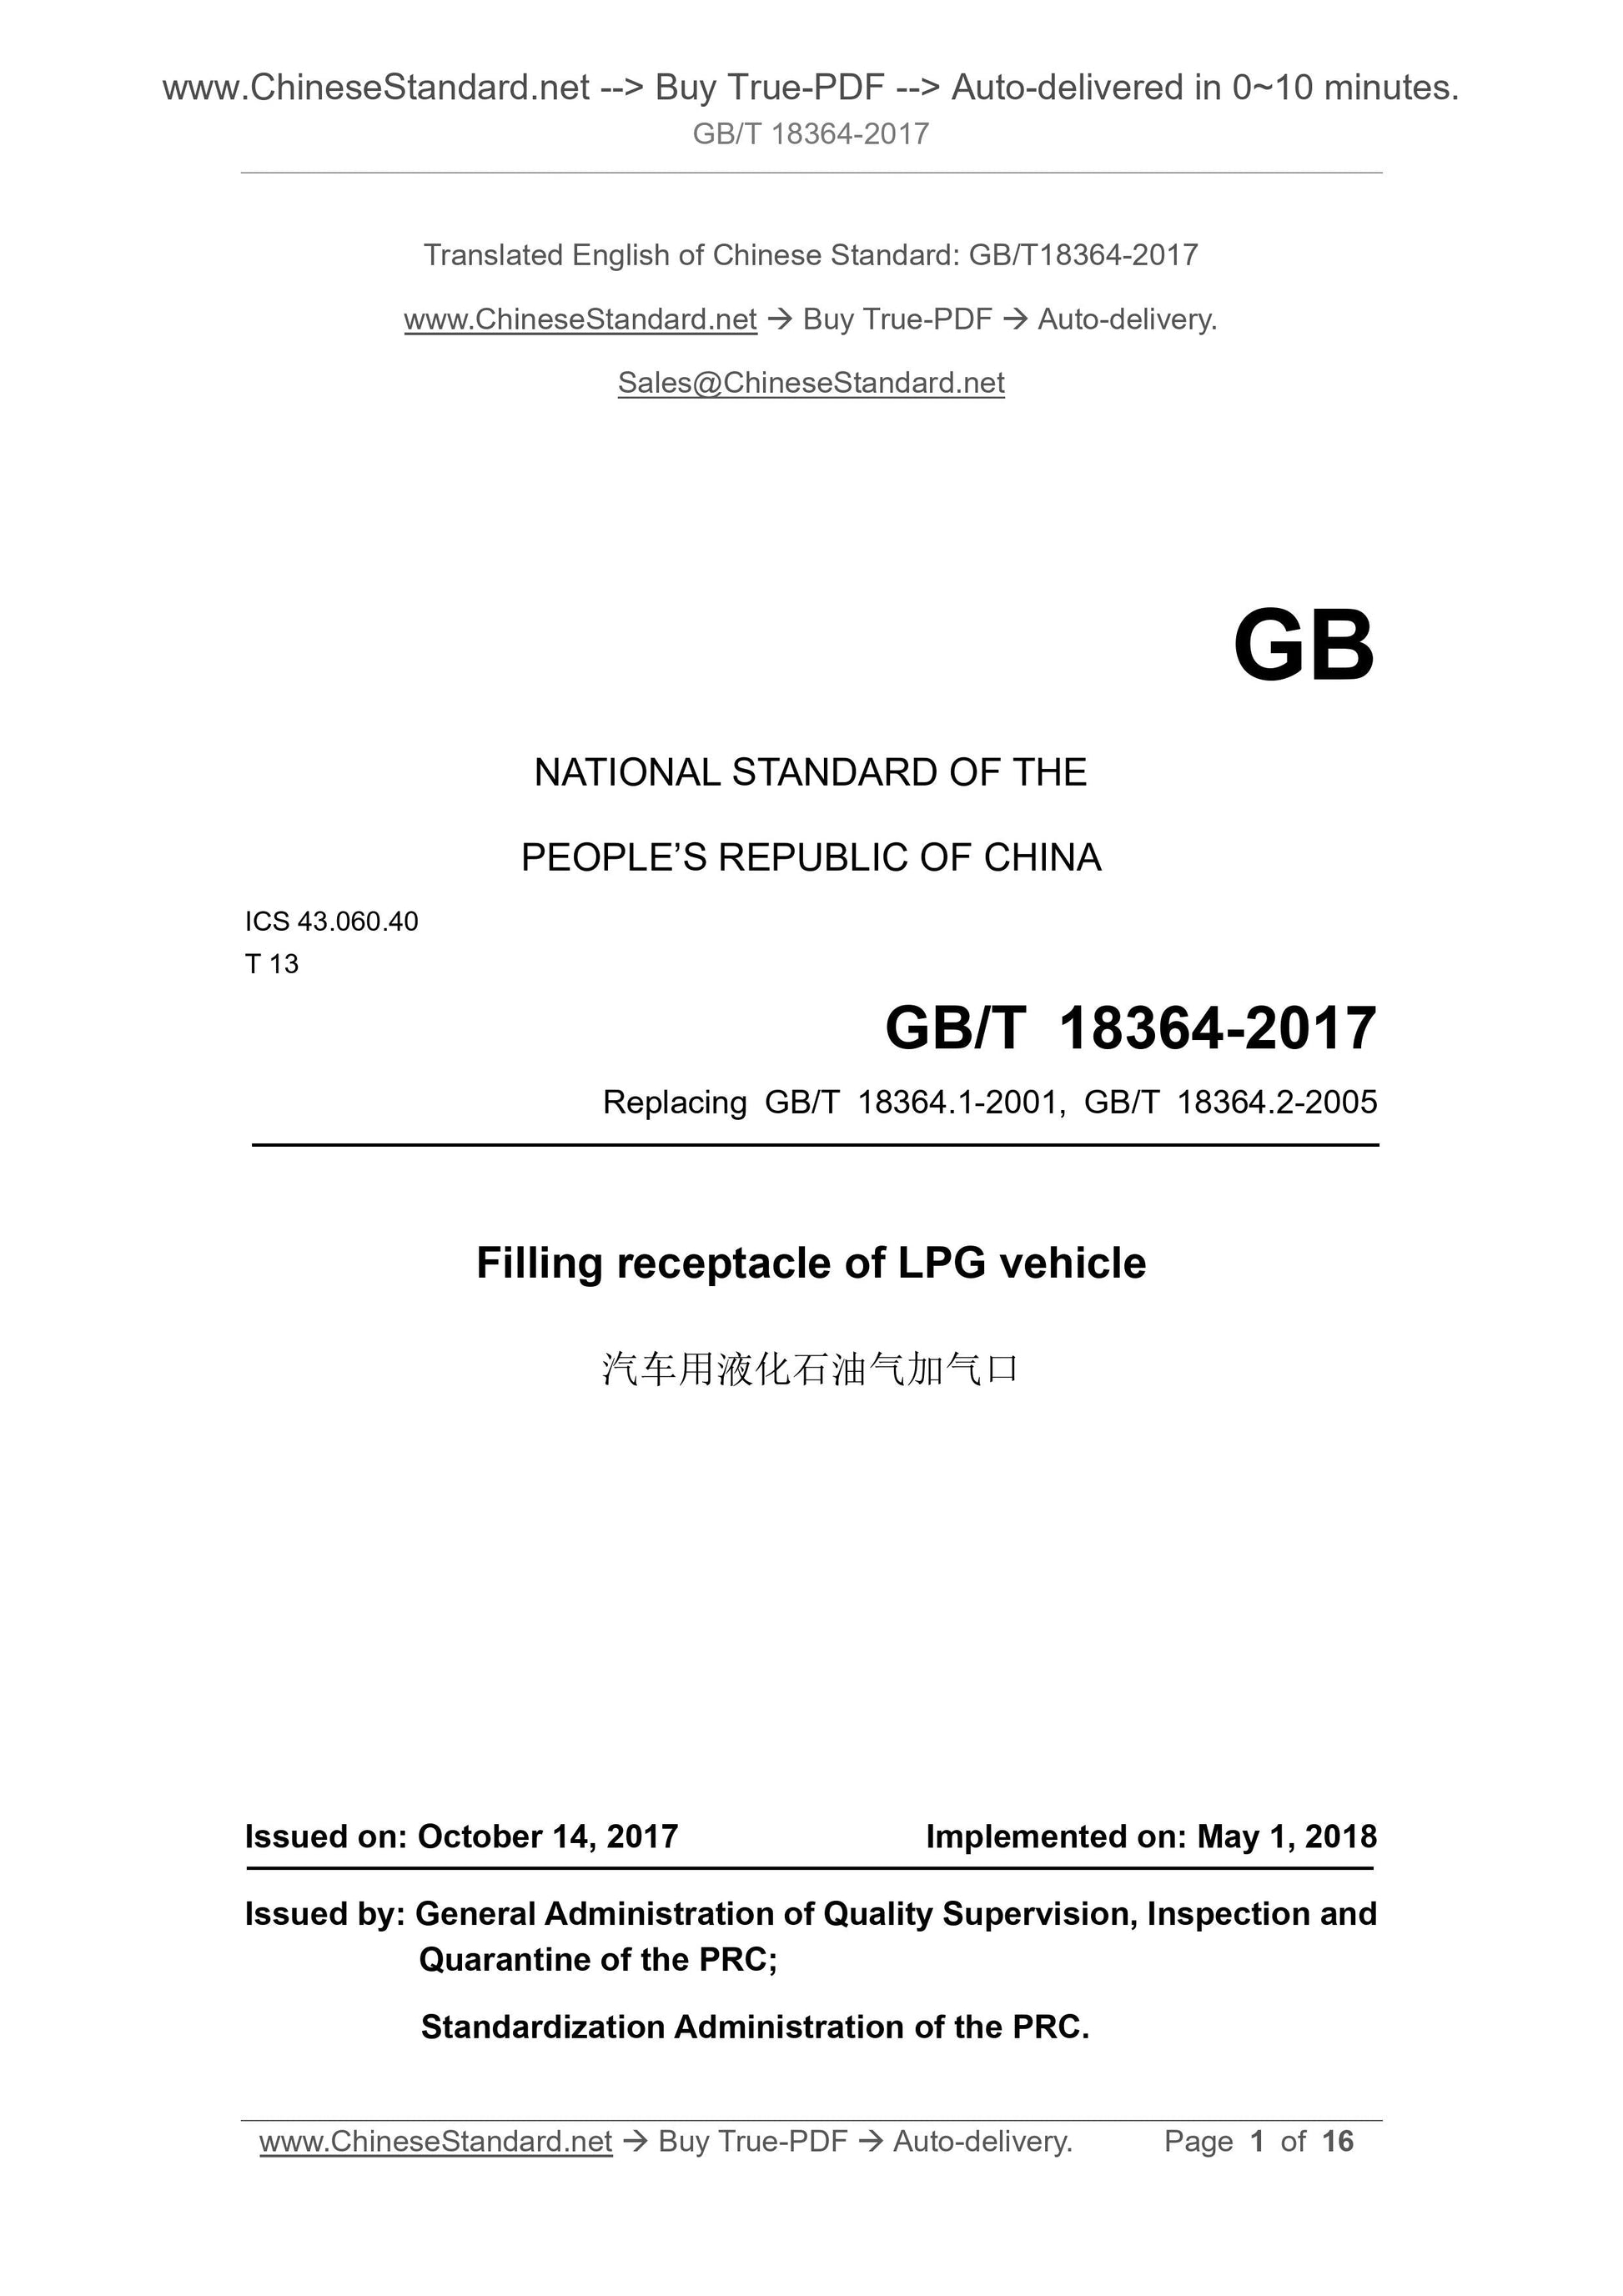 GB/T 18364-2017 Page 1